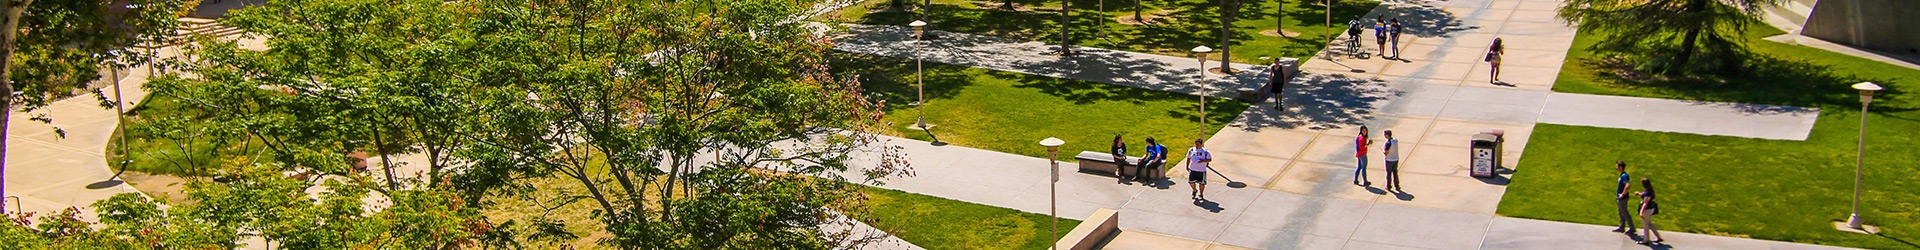 Aerial view of UCR's parklike campus and students walking to class and hanging out on a sunny day.